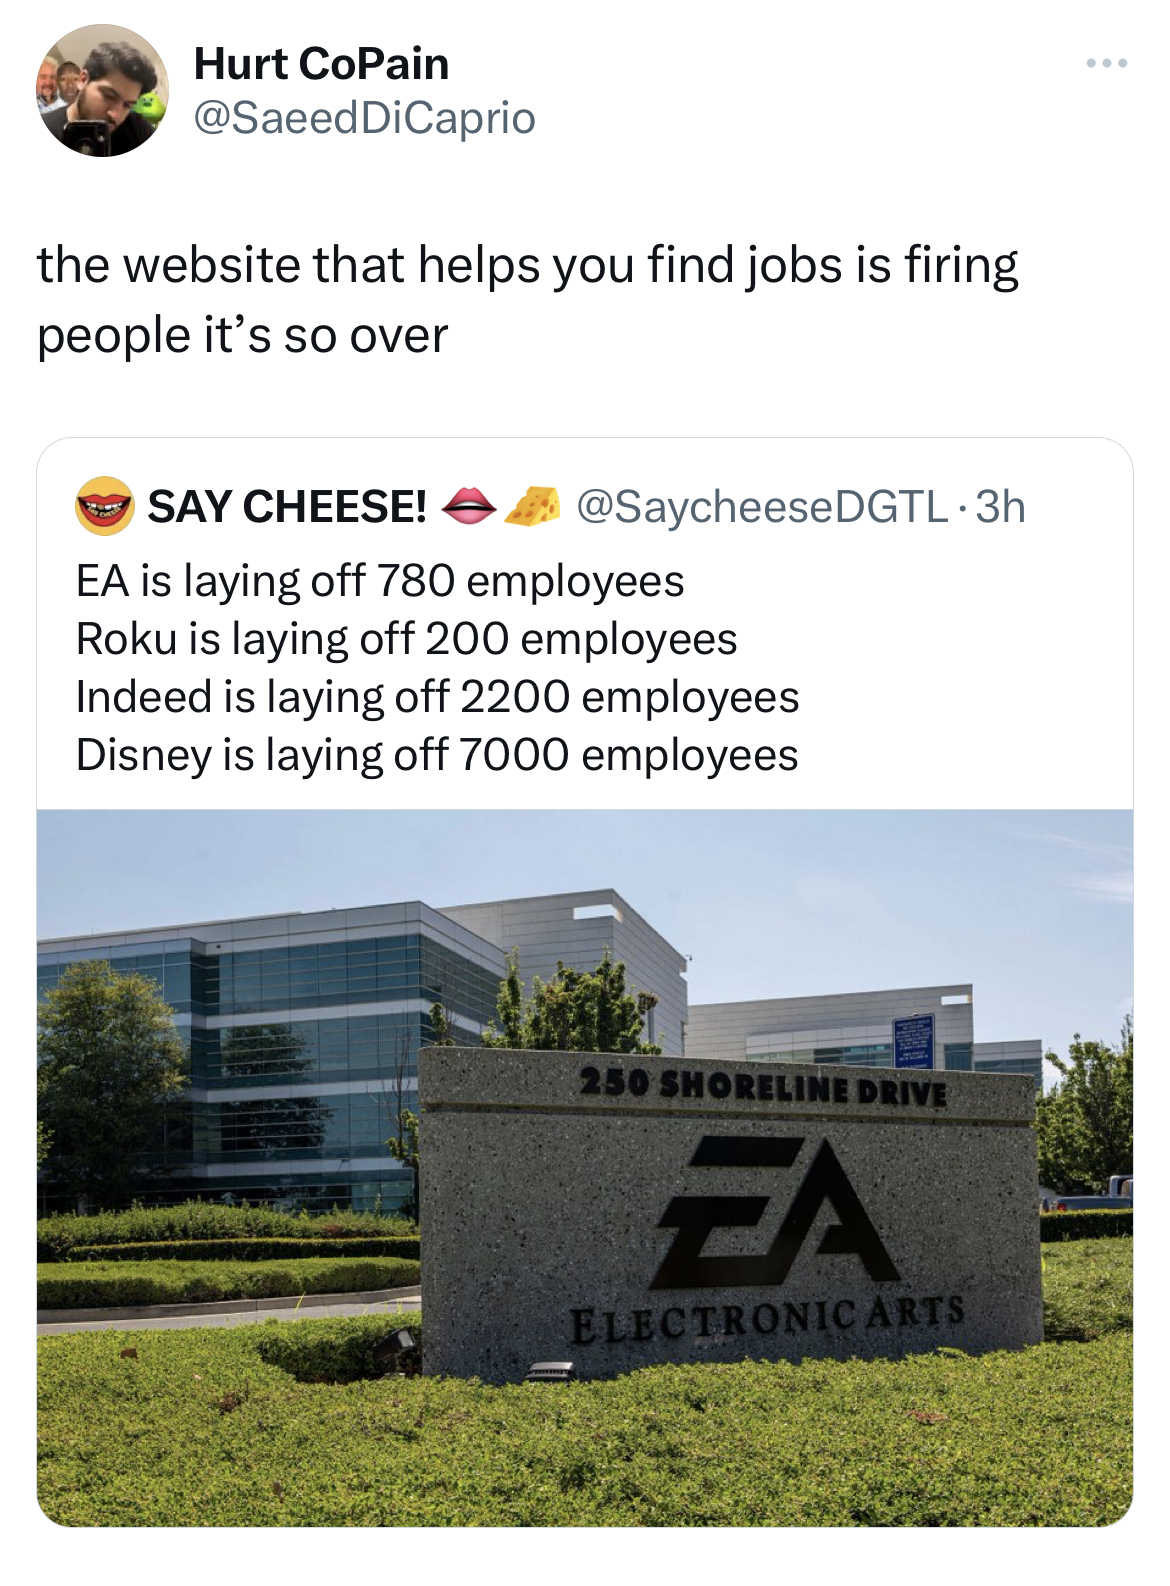 Tweets of the week - electronic arts headquarters - Hurt CoPain the website that helps you find jobs is firing people it's so over Say Cheese! Ea is laying off 780 employees Roku is laying off 200 employees Indeed is laying off 2200 employees Disney is la